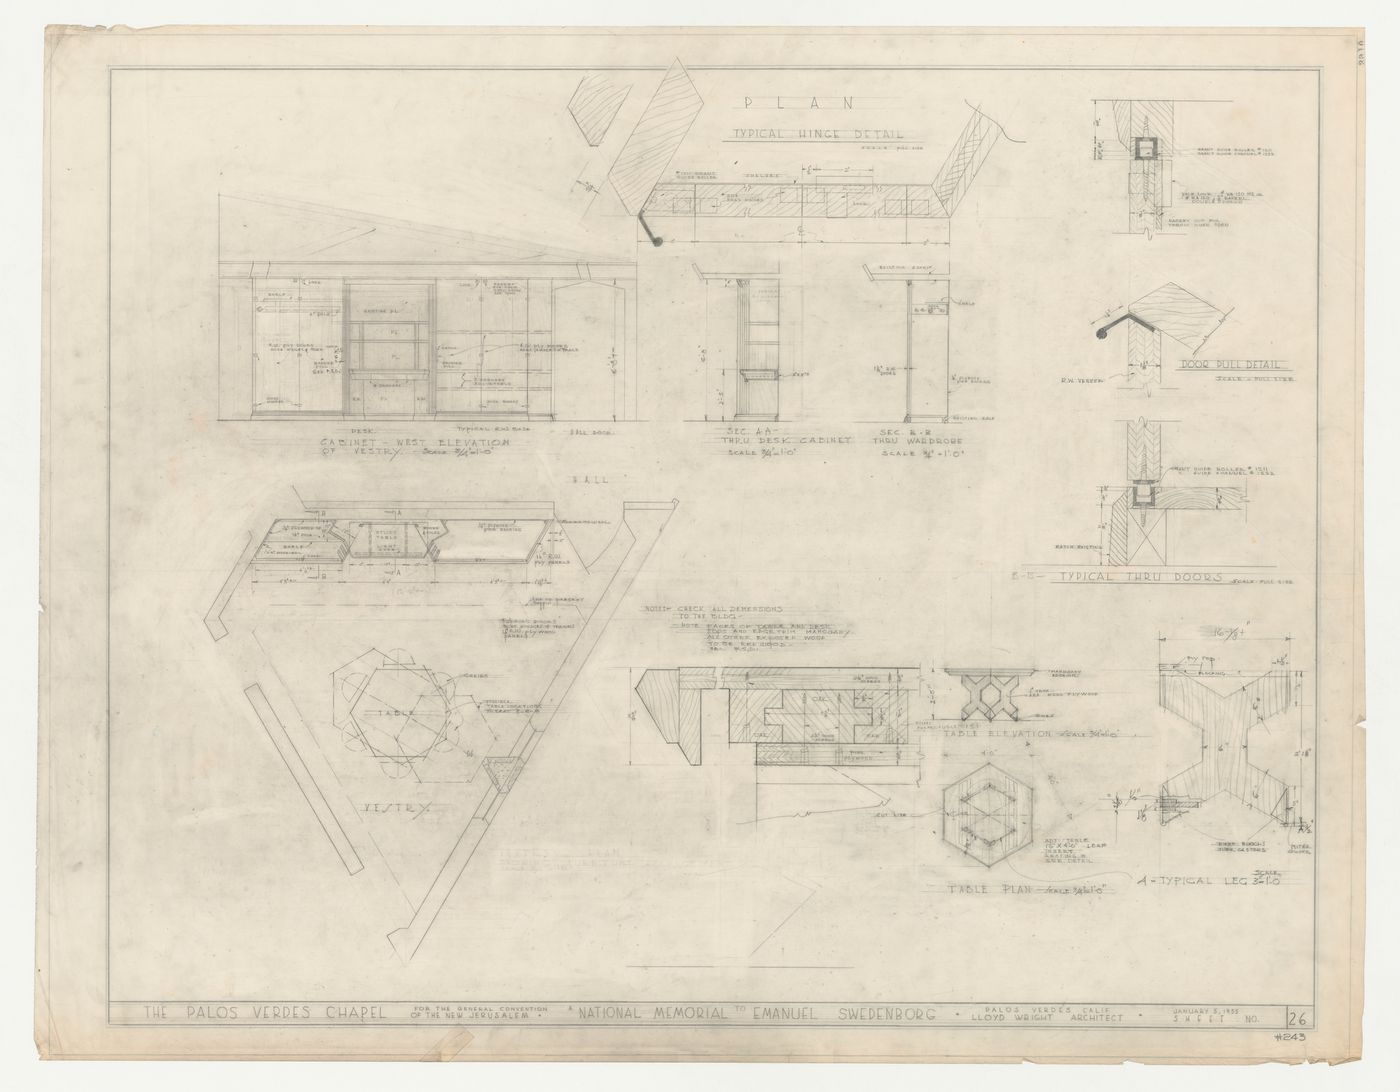 Wayfarers' Chapel, Palos Verdes, California: Plan and interior elevation for the vestry showing cabinetry, and plan, elevations, sections and details for vestry furniture